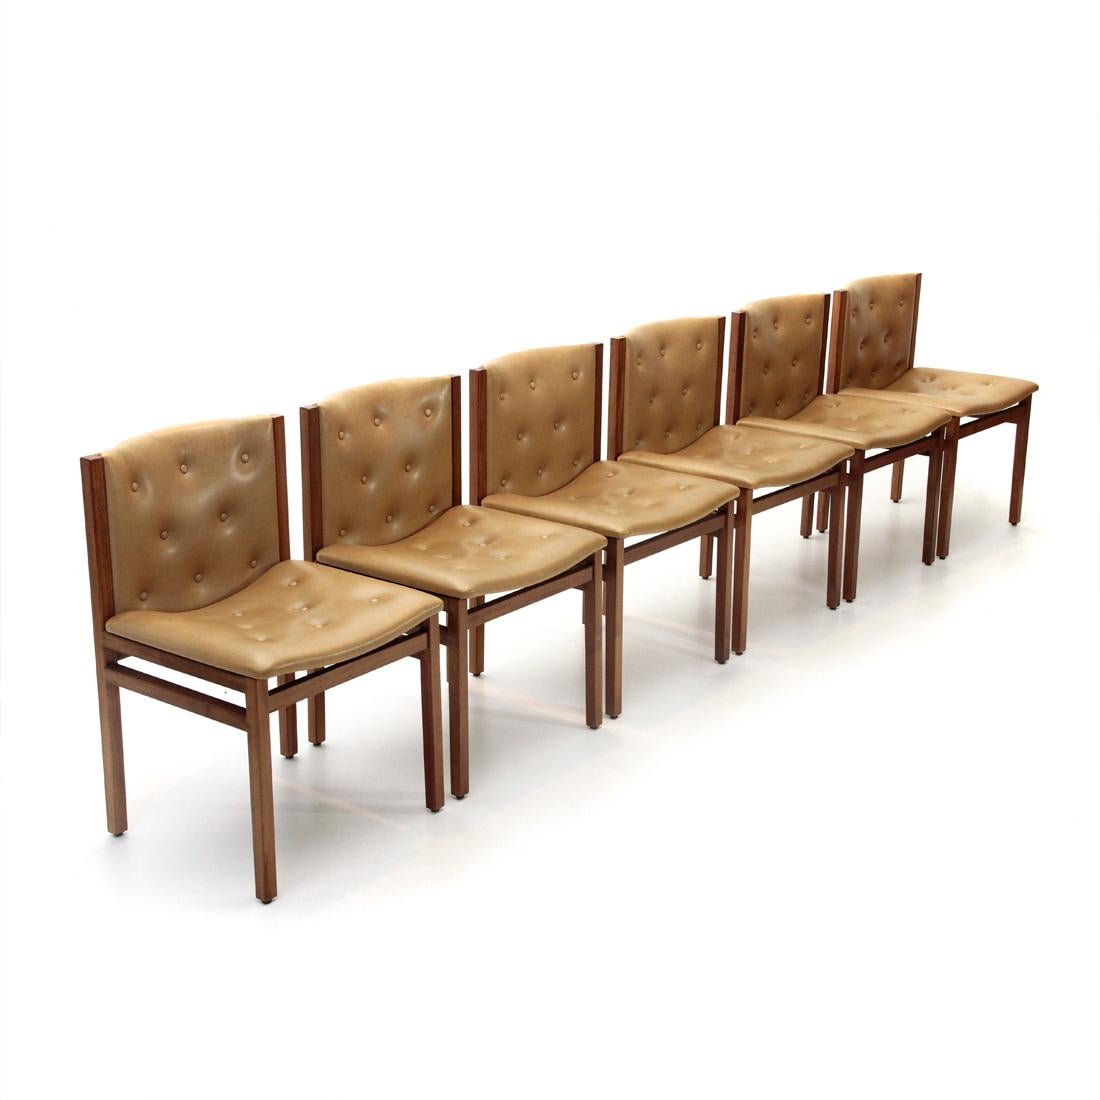 Six chairs produced by La Linea based on a project by Tito Agnoli in the 1960s.
Solid wood frame.
Seat and backrest, padded and lined in leatherette, with stitched buttons.
Good general conditions, some signs due to normal use over